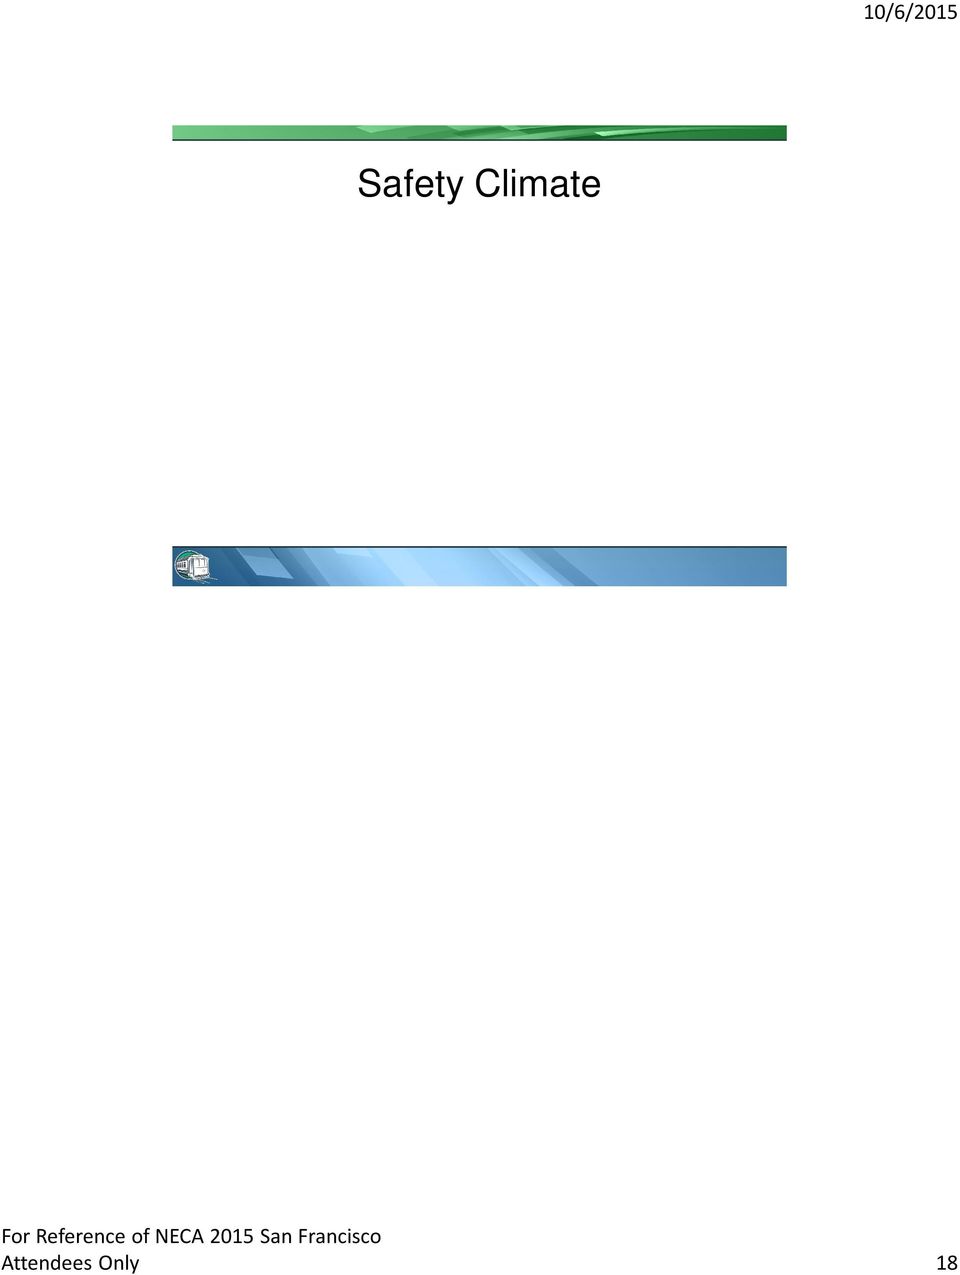 Climate Culture A system of shared beliefs, values, customs and behaviors used by members of a society Safety Culture Incorporates the safety beliefs, values, customs and normal